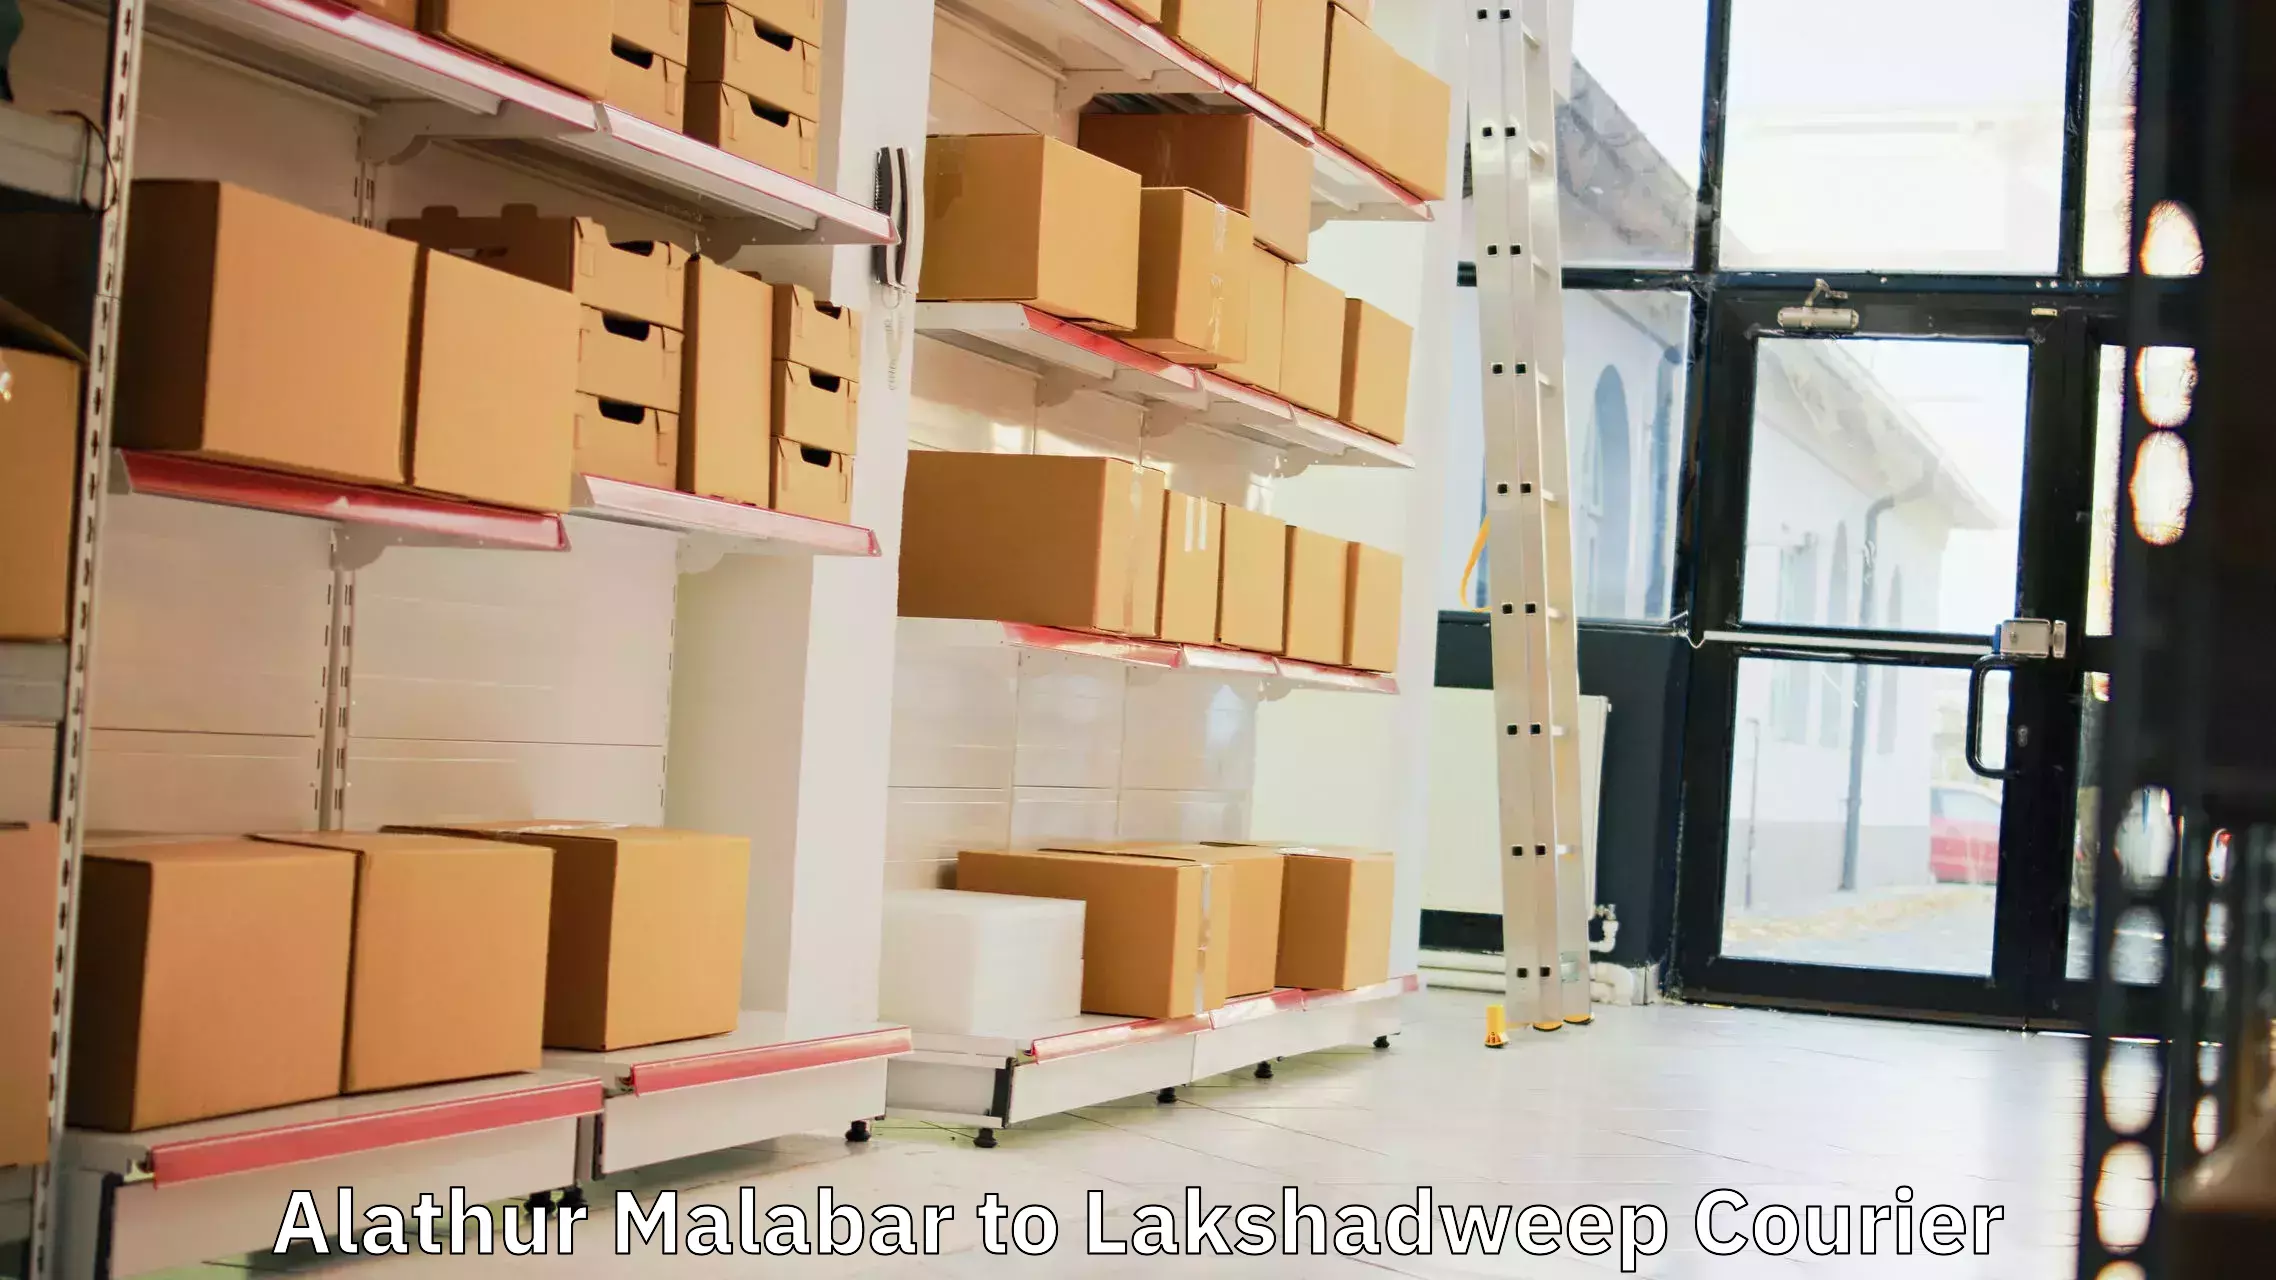 Professional courier services Alathur Malabar to Lakshadweep